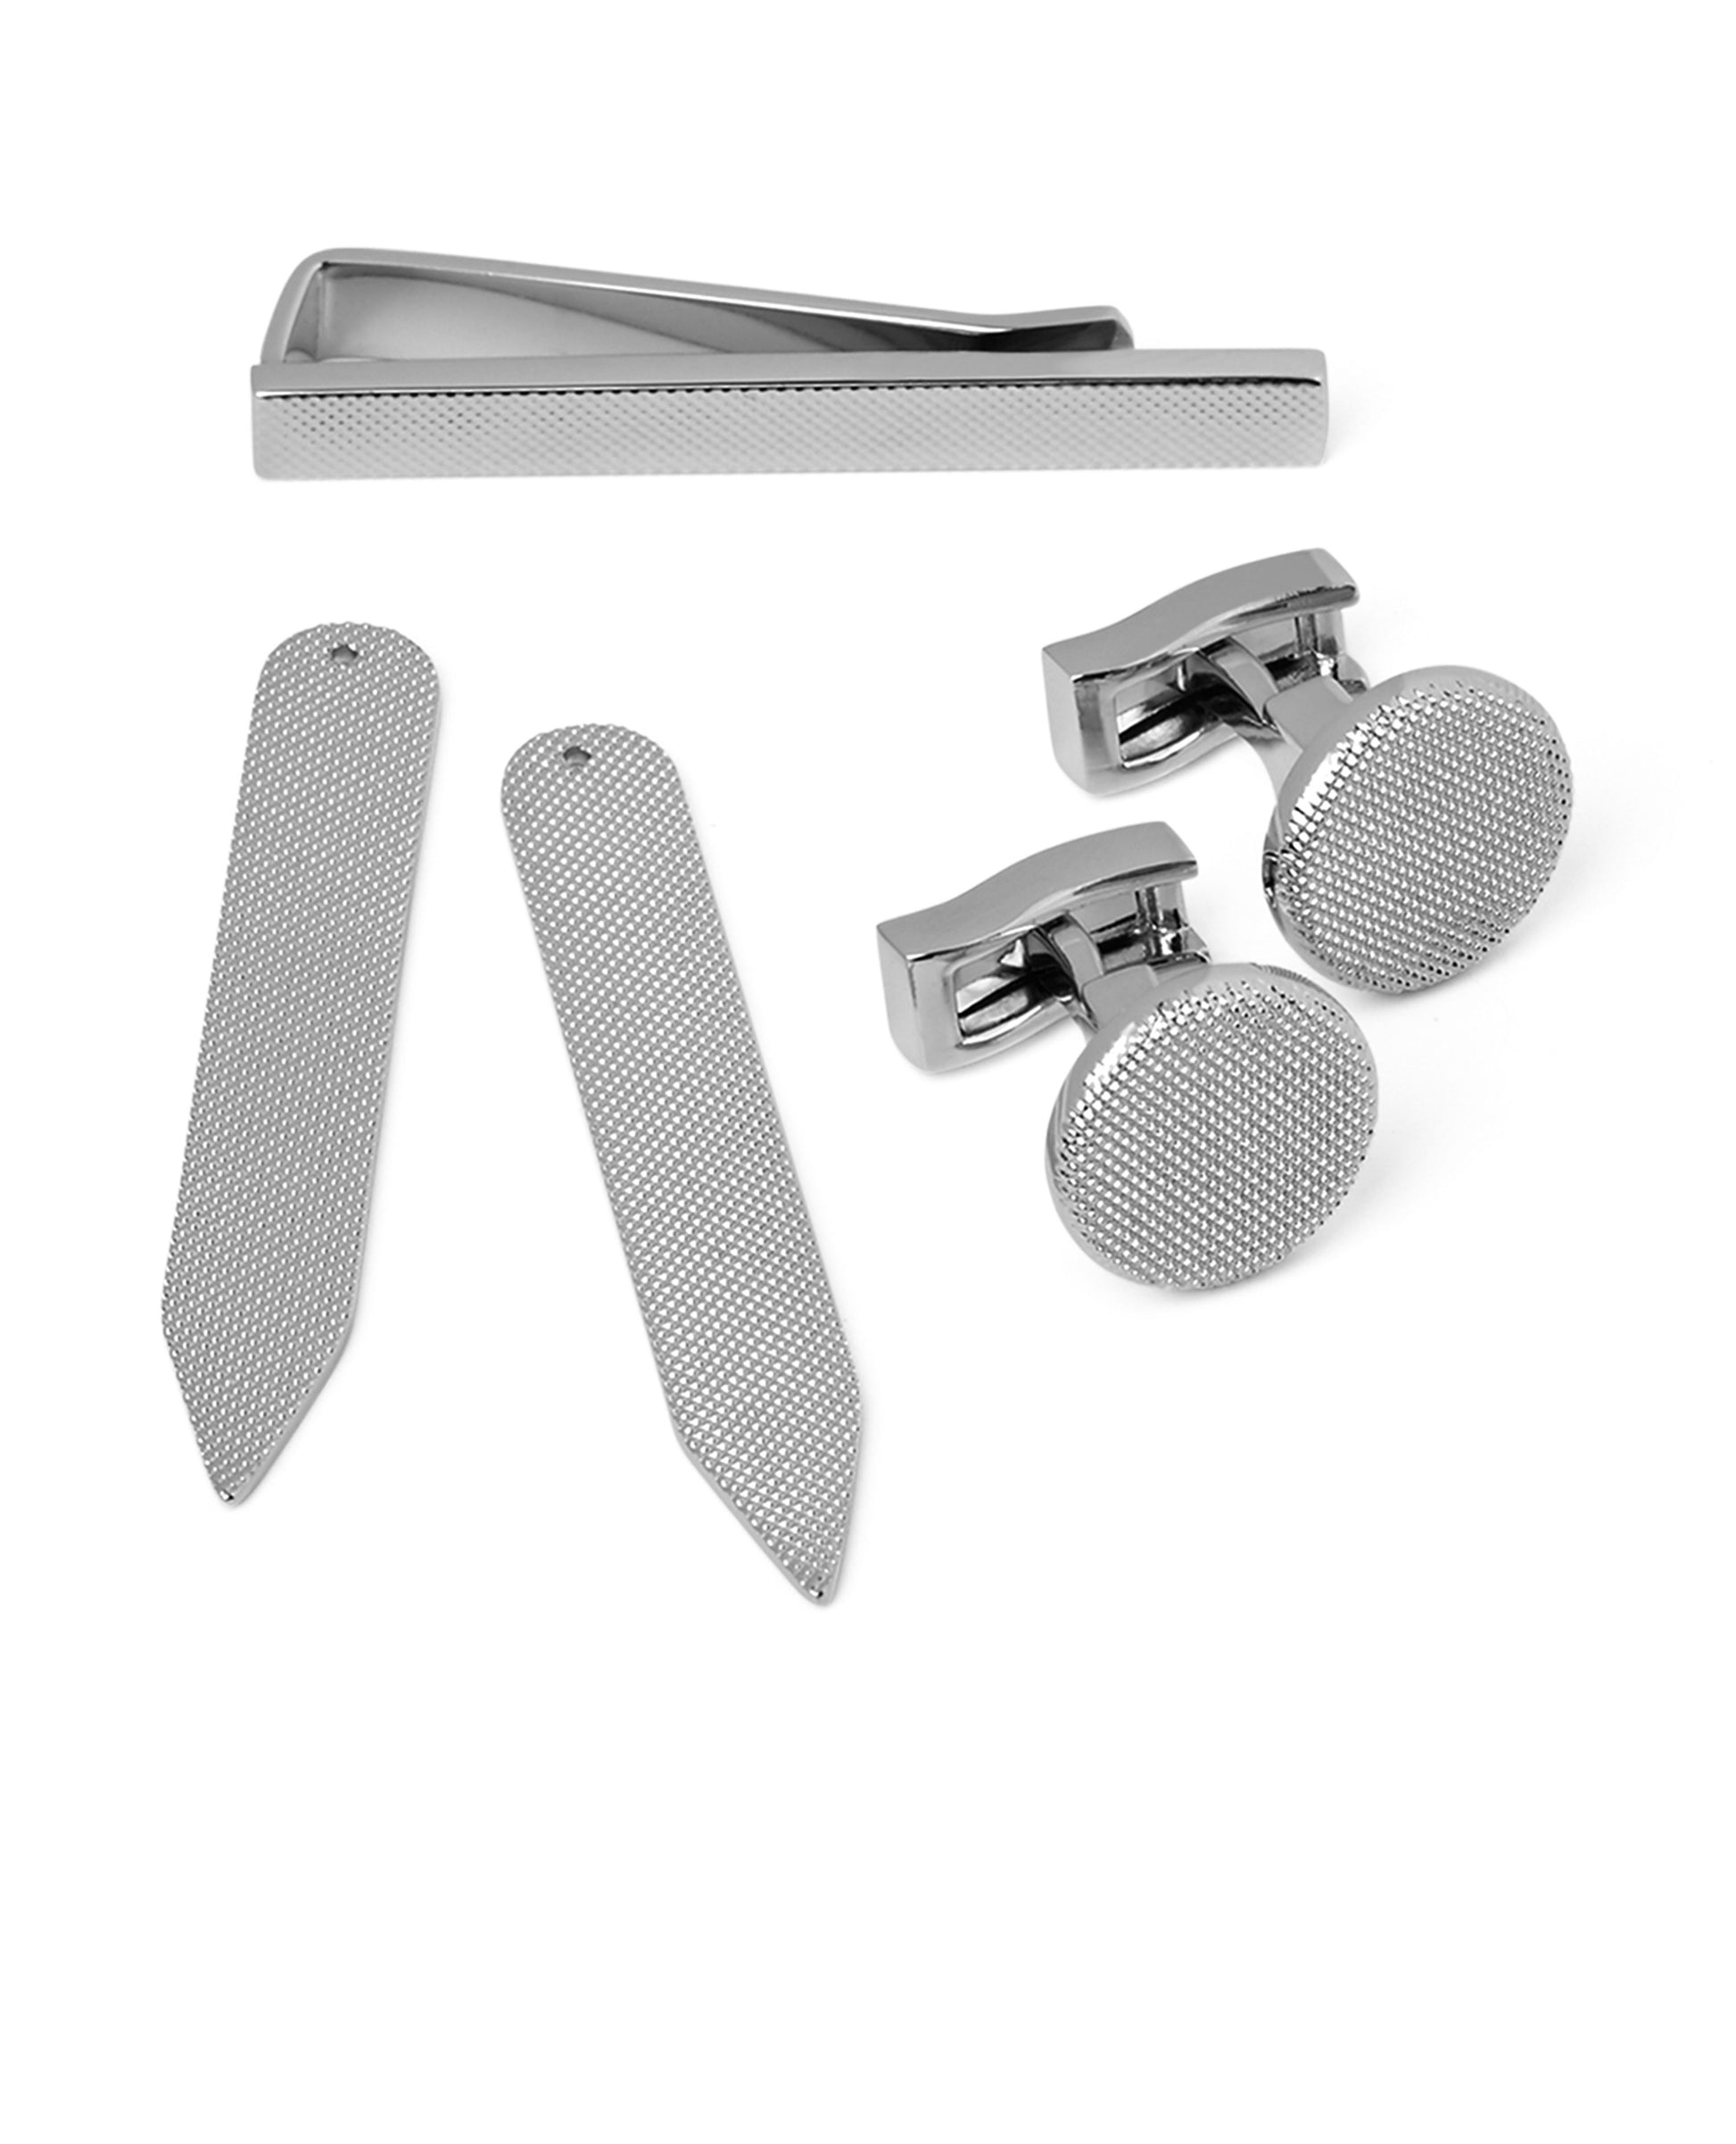 Image 2 of Silver Knurled Shirt Accessory Gift Set